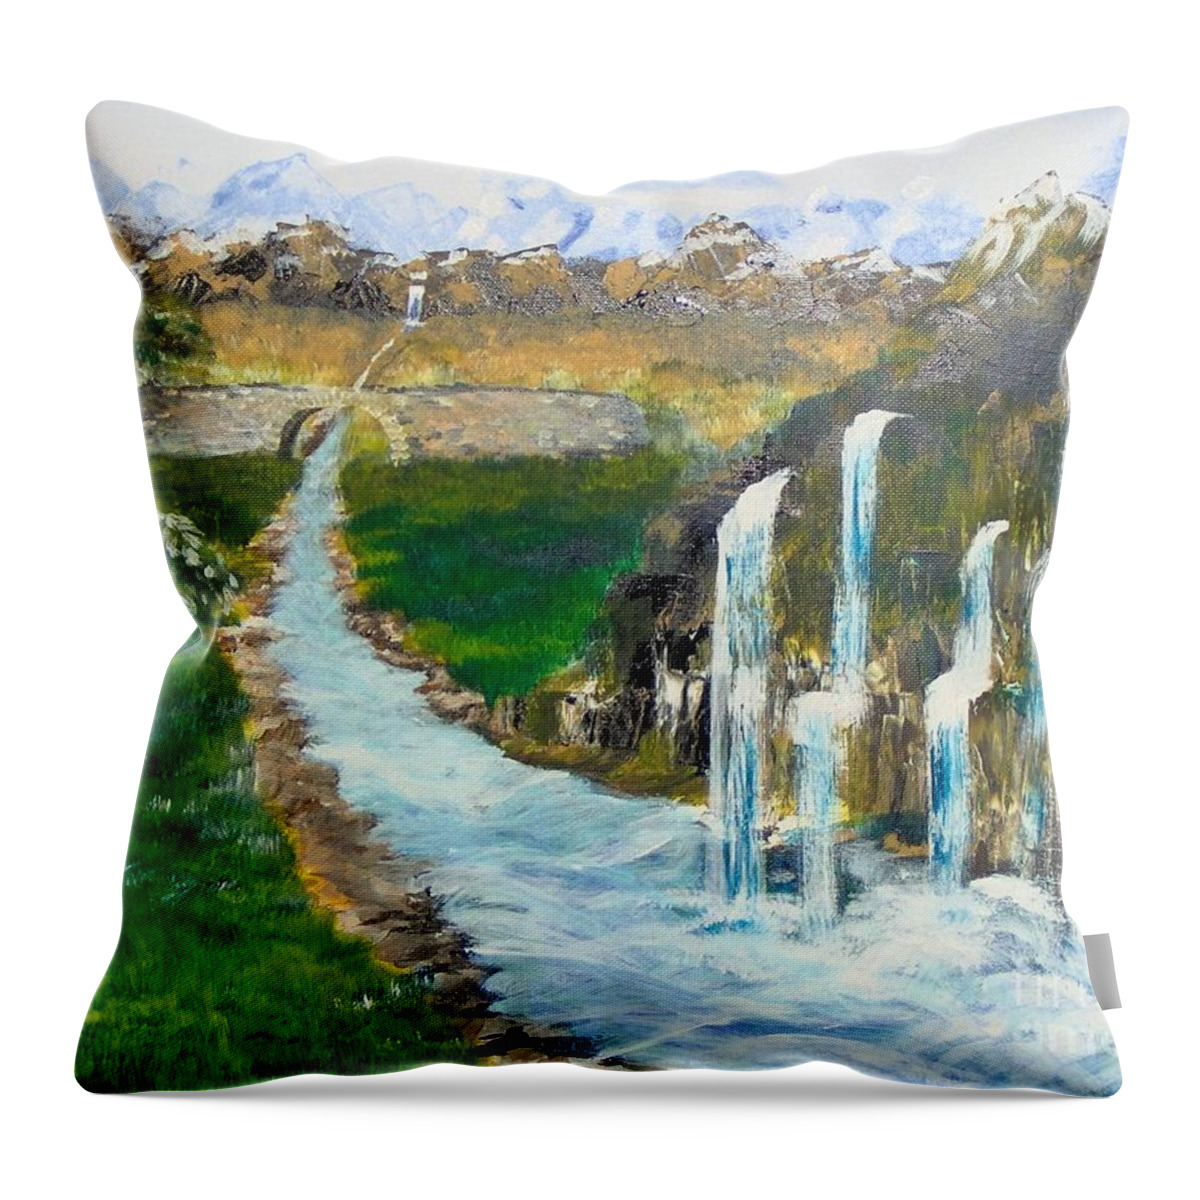 Waterfalls Throw Pillow featuring the painting Waterfalls by Saundra Johnson